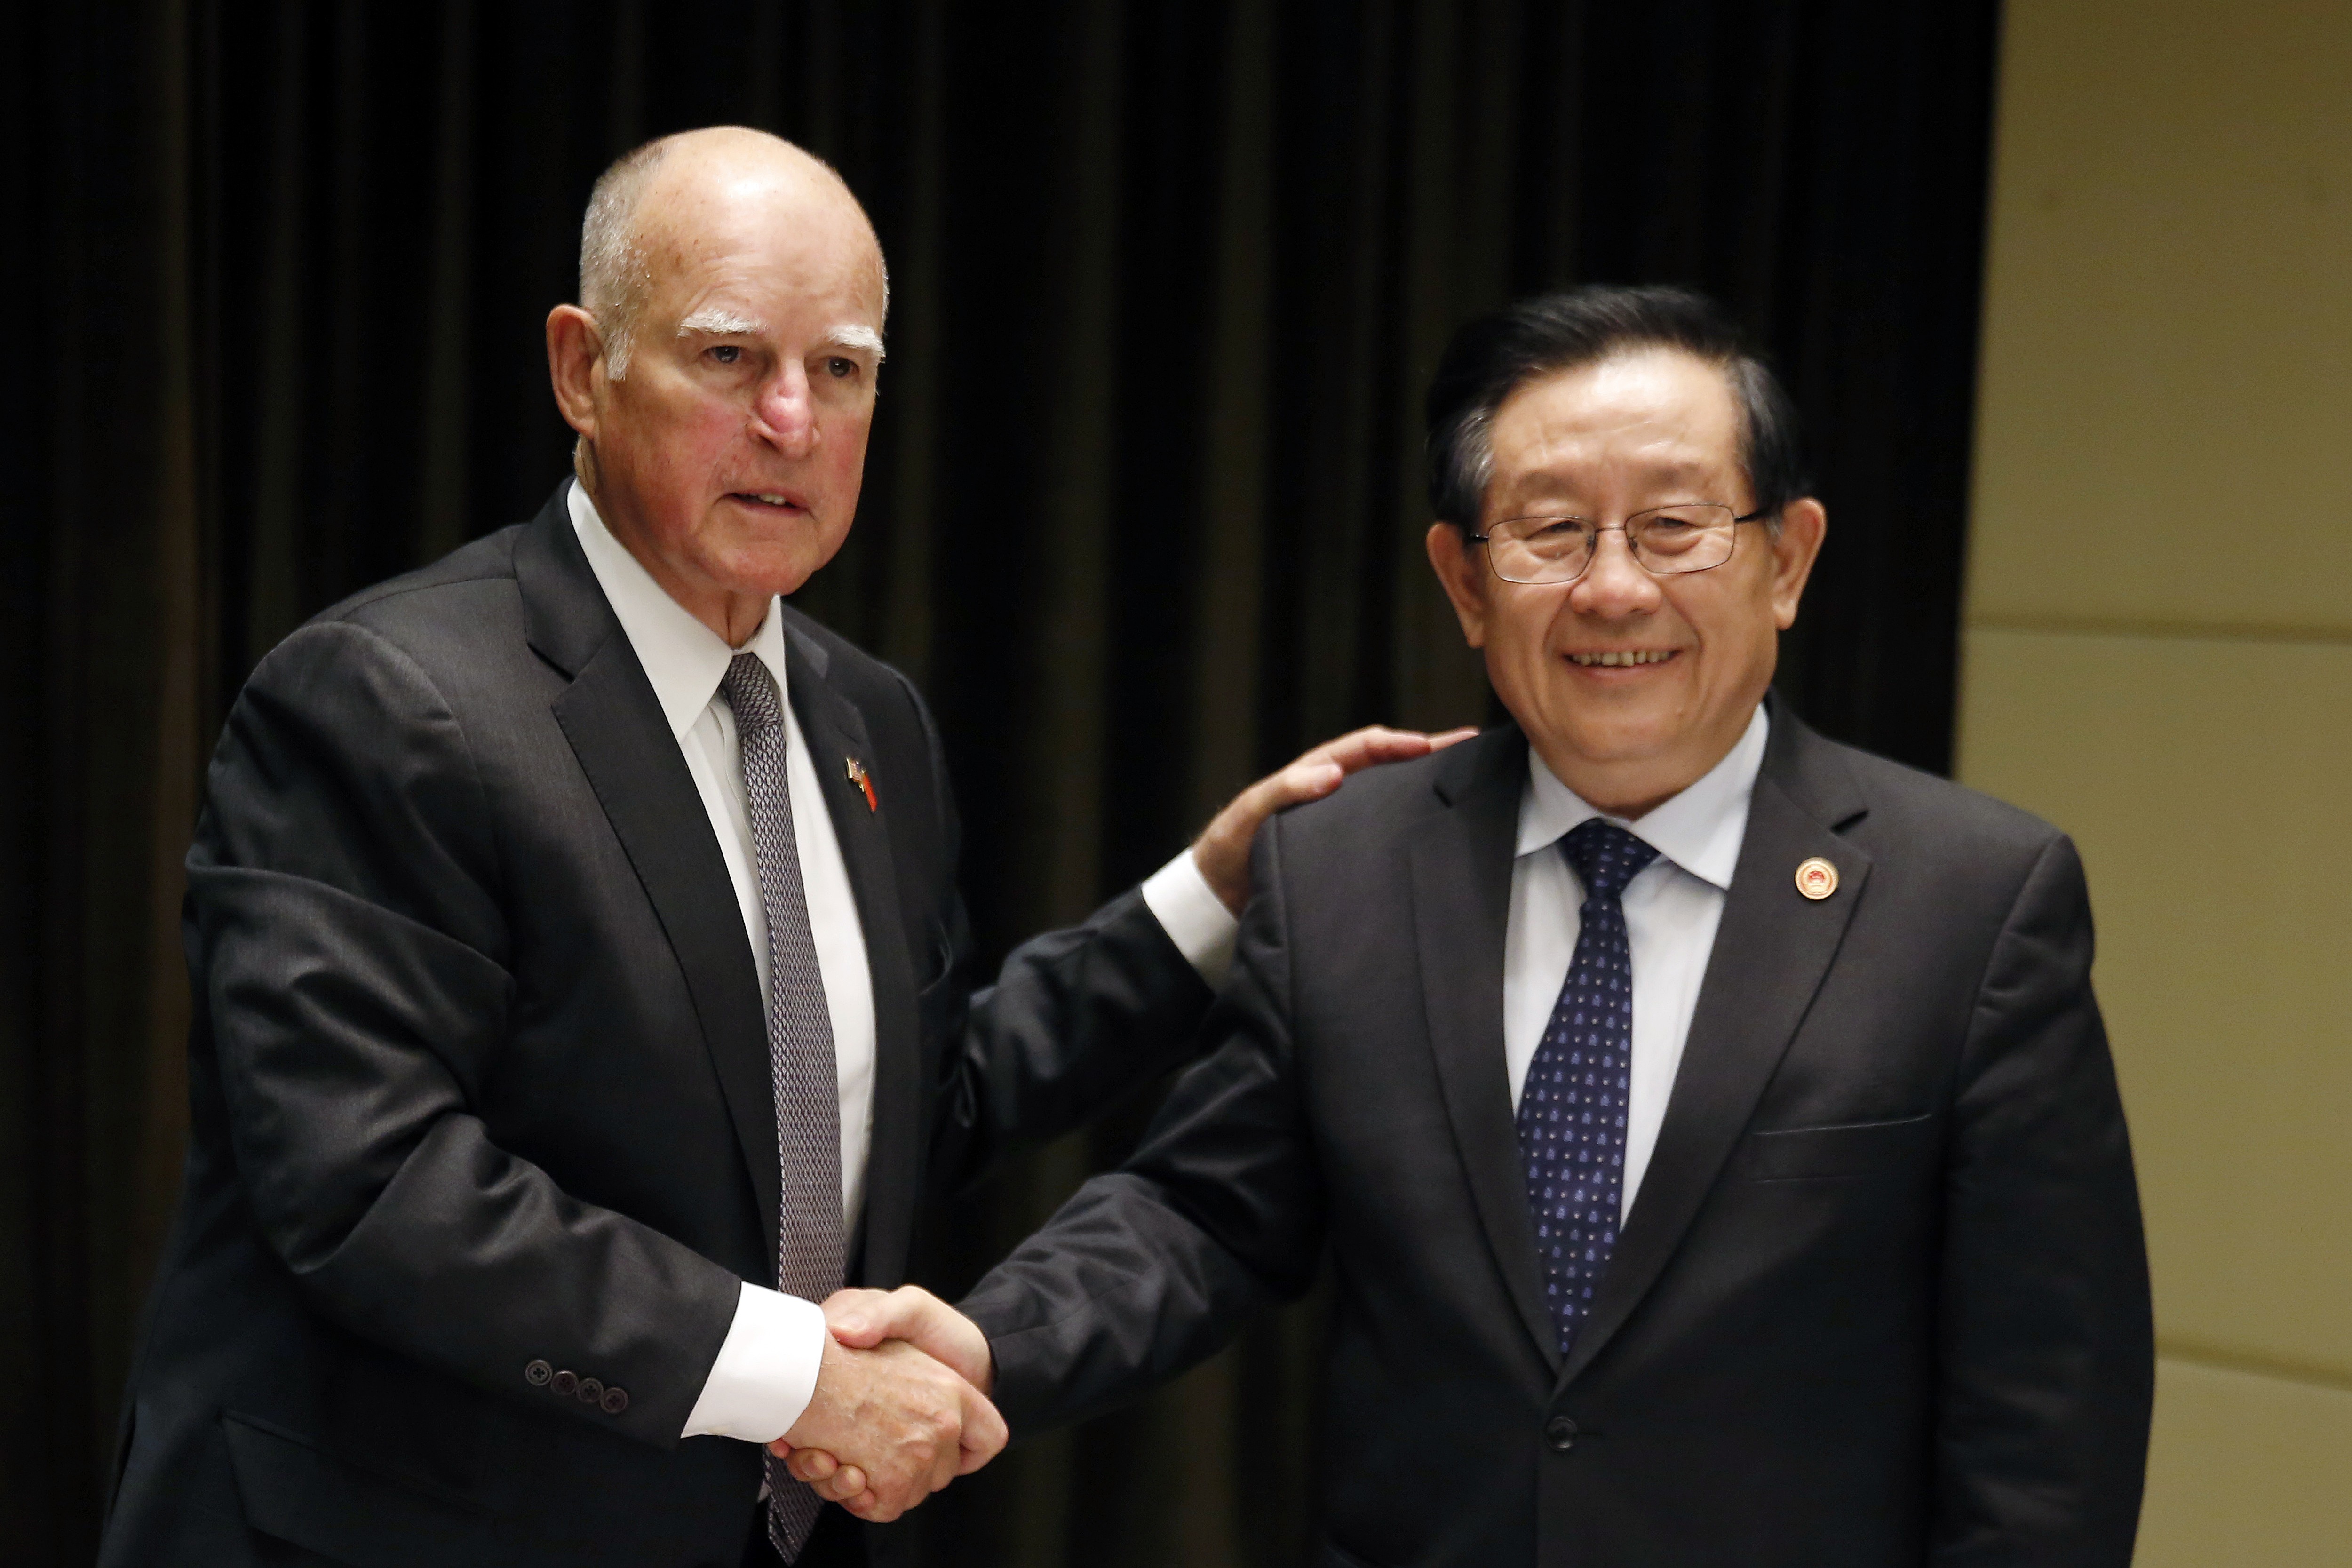 California governor Jerry Brown shakes hands with China's Science and Technology Minister Wan Gang after signing a memorandum of understanding of Clean Technology in Beijing in June 2017. Photo: AP